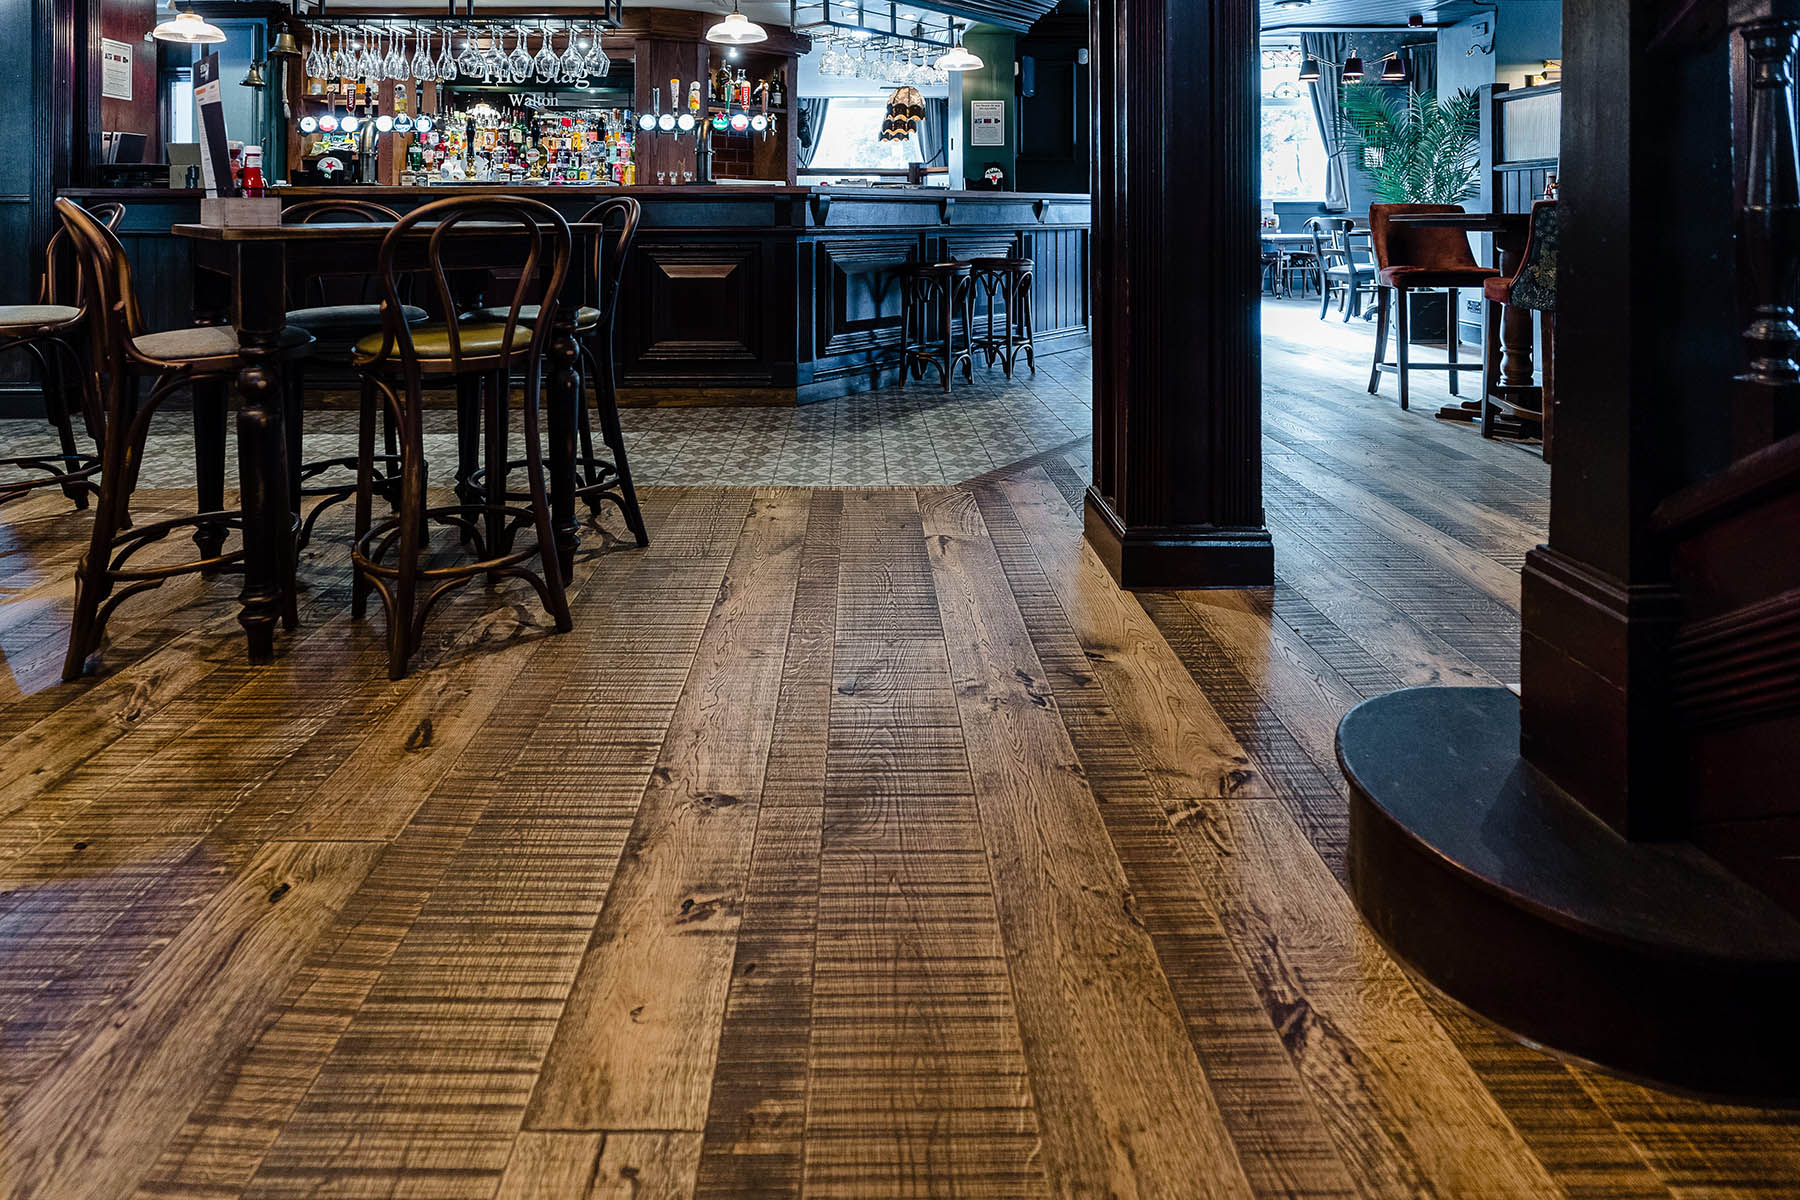 Commercial wood flooring in a pub setting